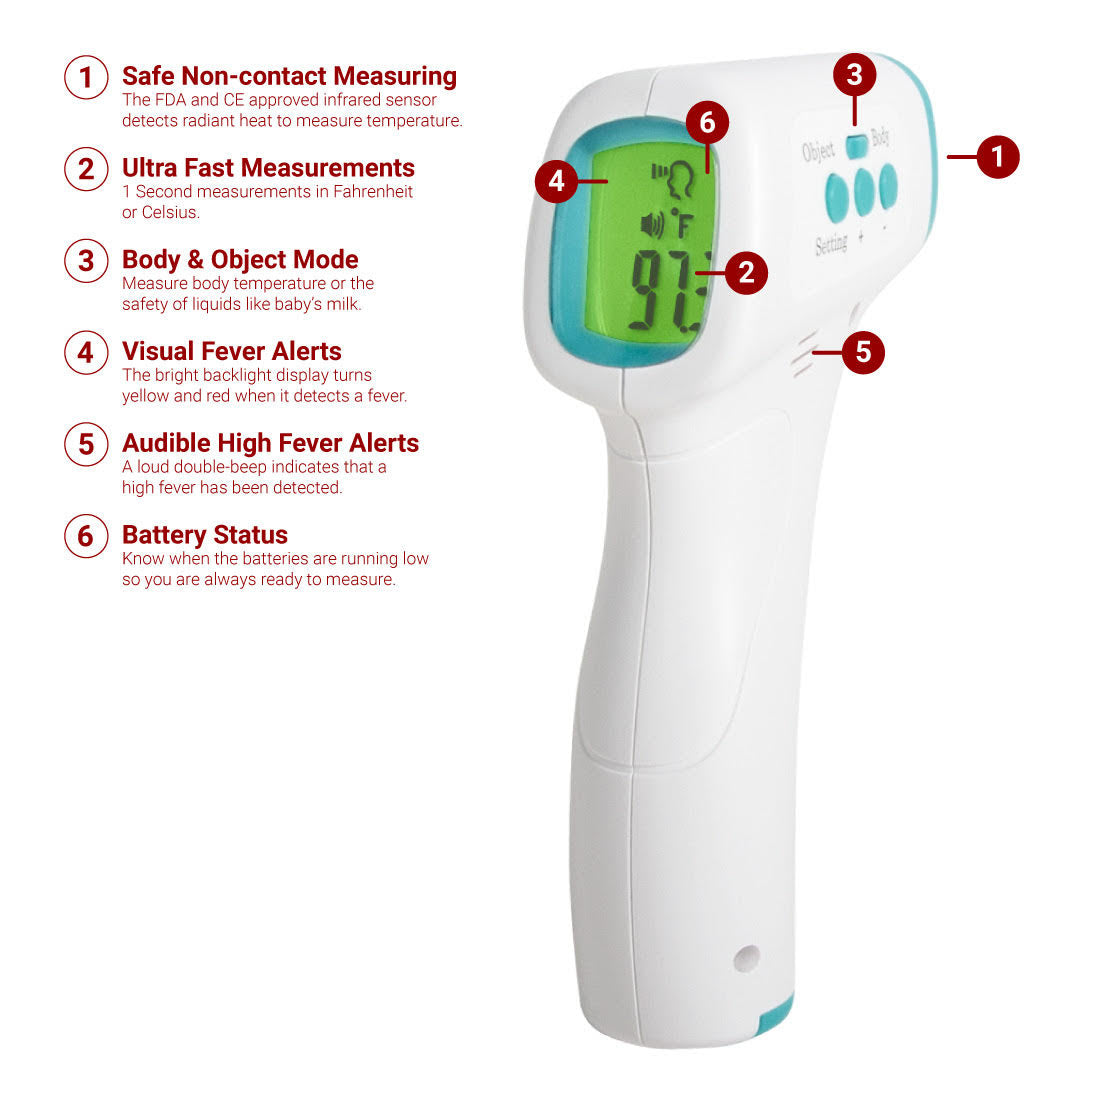 Non-contact Infrared Forehead Thermometer-Thermometer-Lawson Screen & Digital Products Lawson Screen & Digital Products dtf printer screen printing direct to fabric equipment machine printers equipment dtg printer screen printing direct to garment equipment machine printers